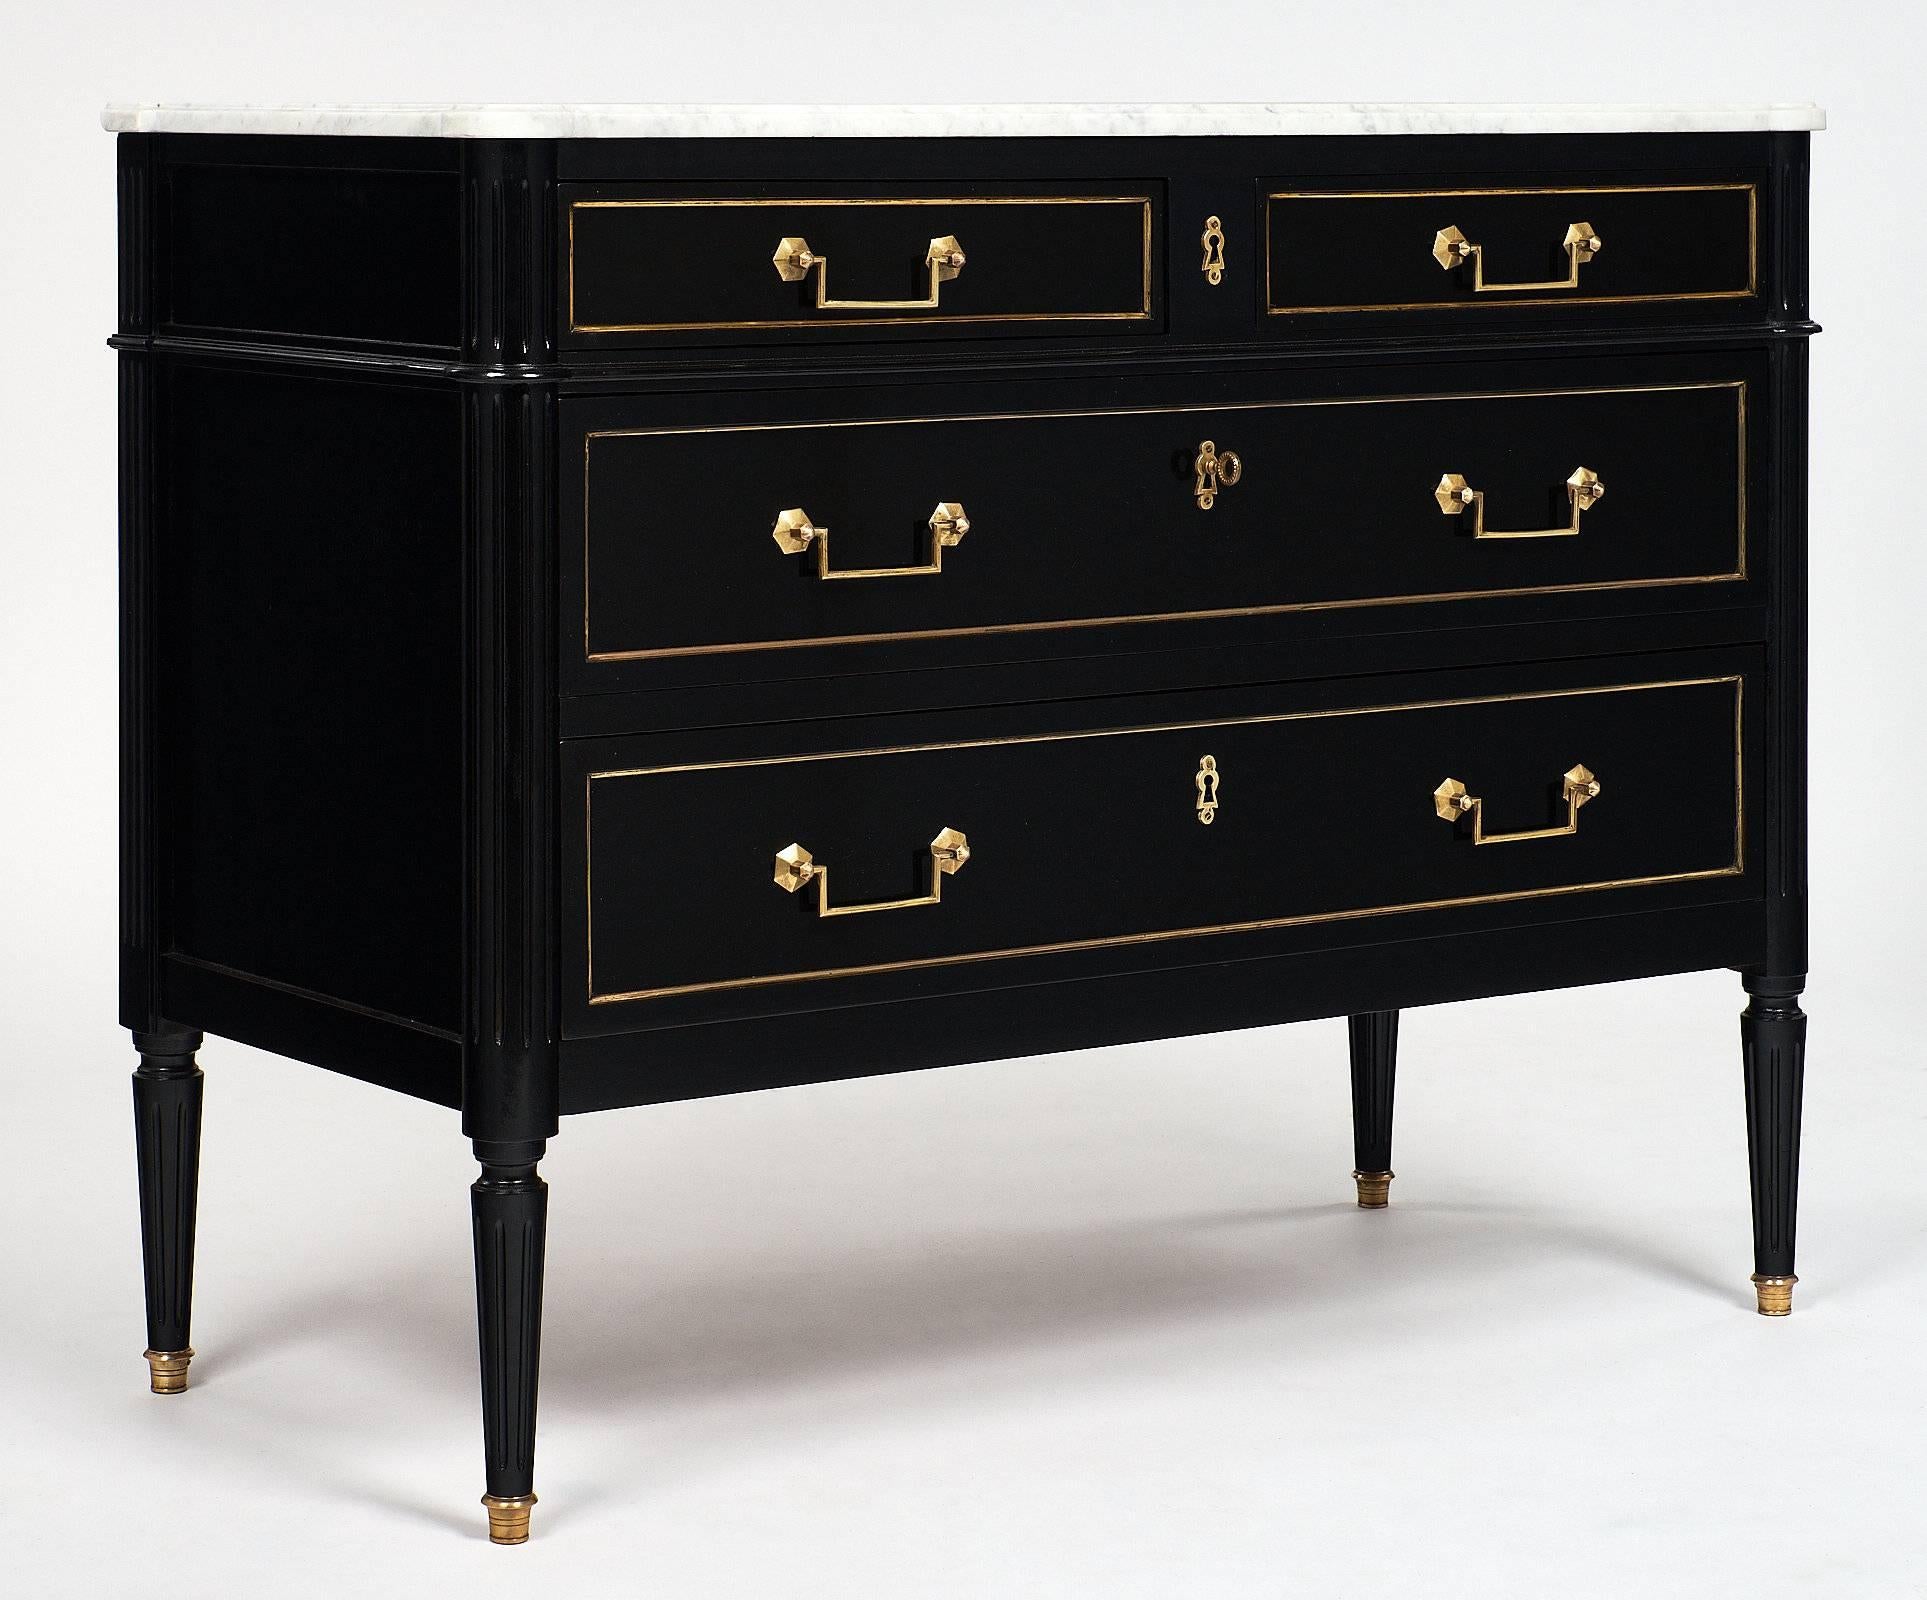 French Louis XVI chest of drawers of mahogany, ebonized and finished with a lustrous French polish. It also has a Carrara marble top and tapered legs capped with brass feet. There are four dovetailed drawers enhanced with gilt brass trims and finely